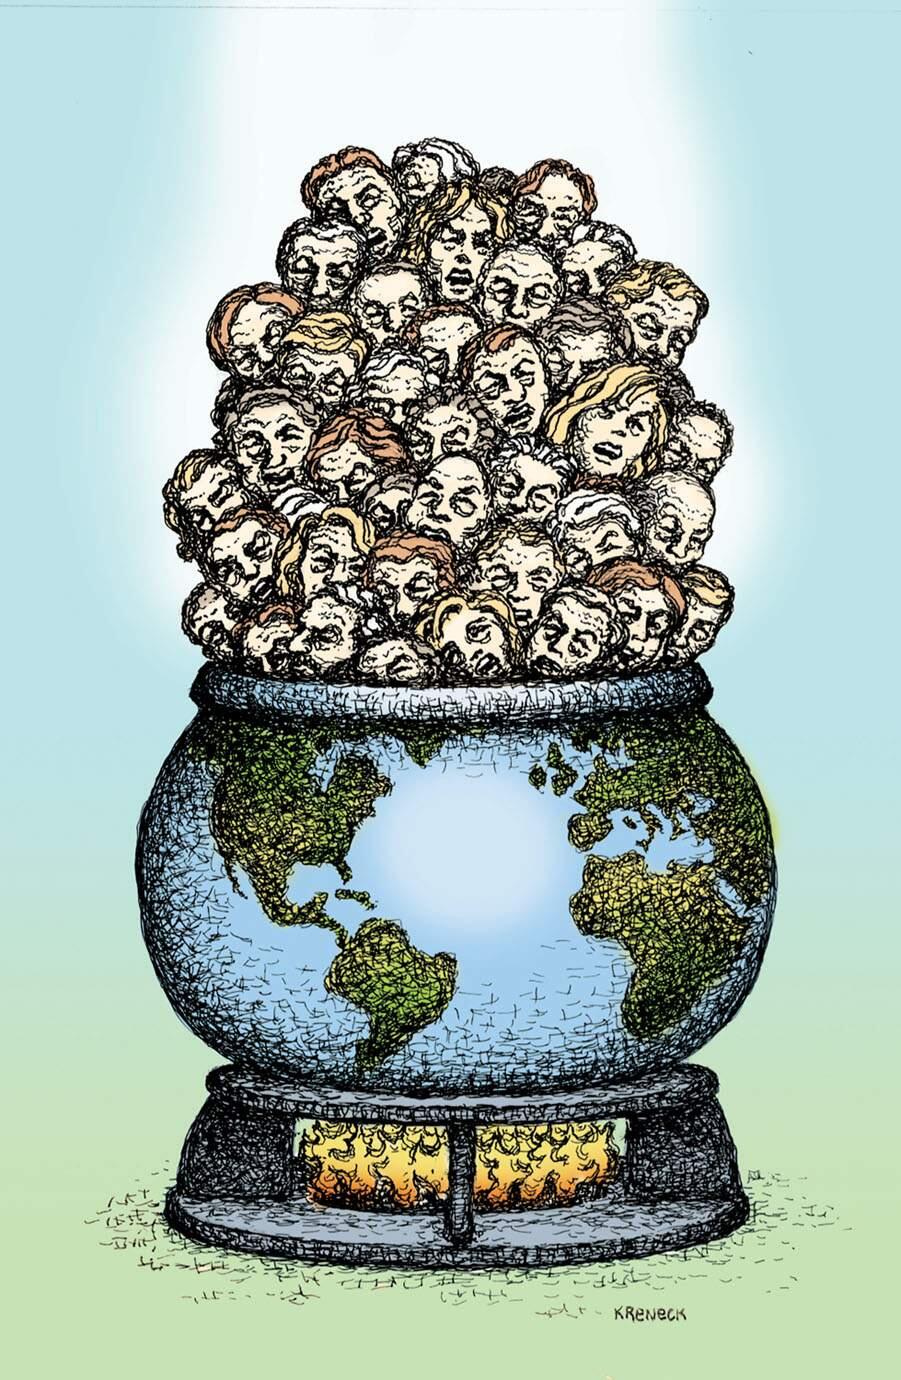 This artwork by Kevin Kreneck relates to the global warming and population increase.